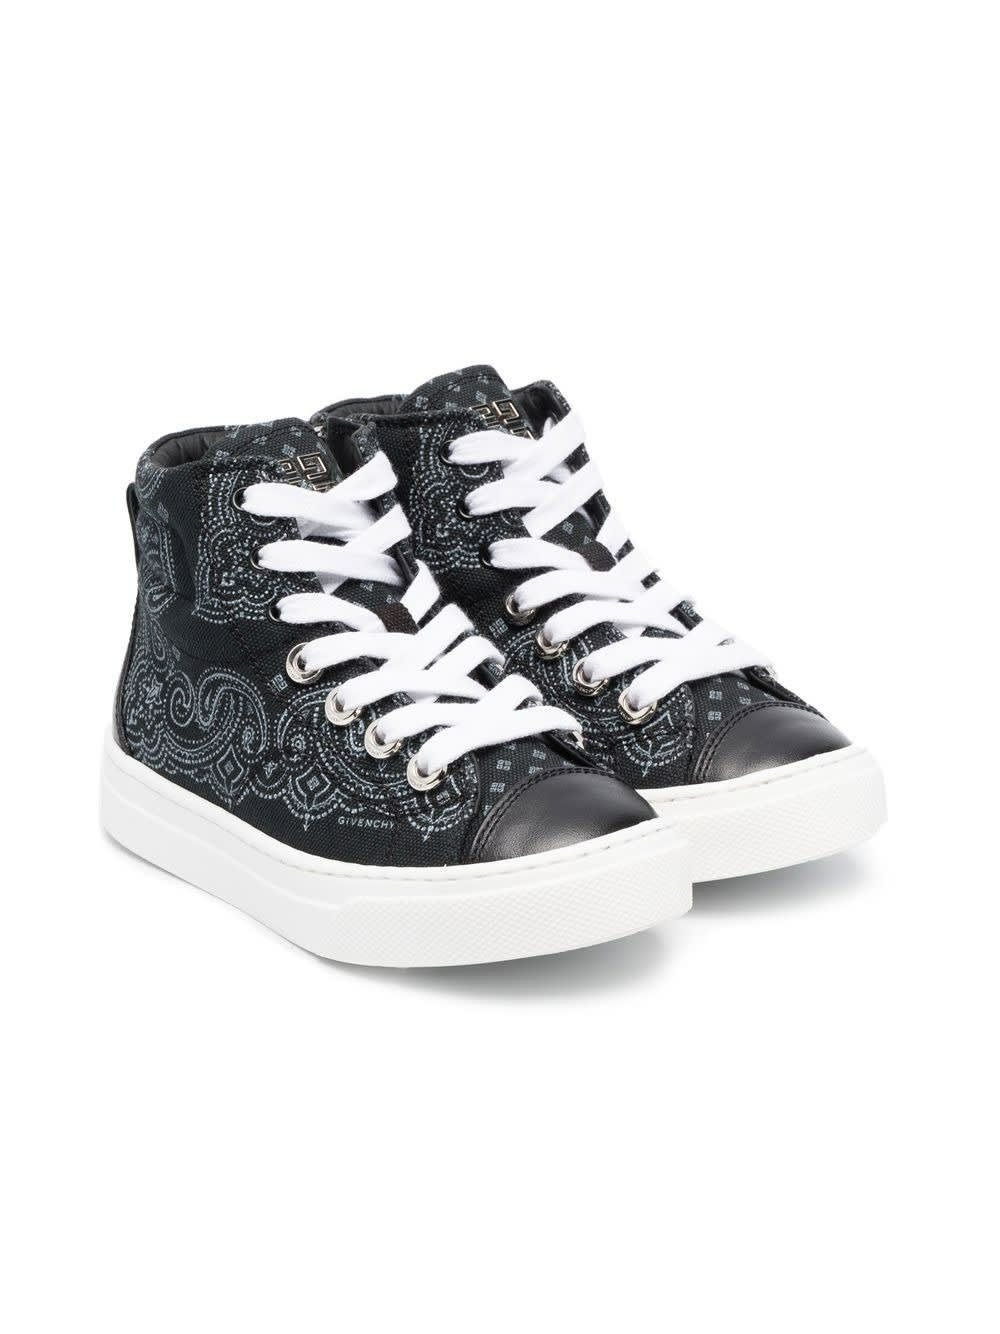 Givenchy Kids High-top Sneakers In Black Leather With Bandana Print In Nero